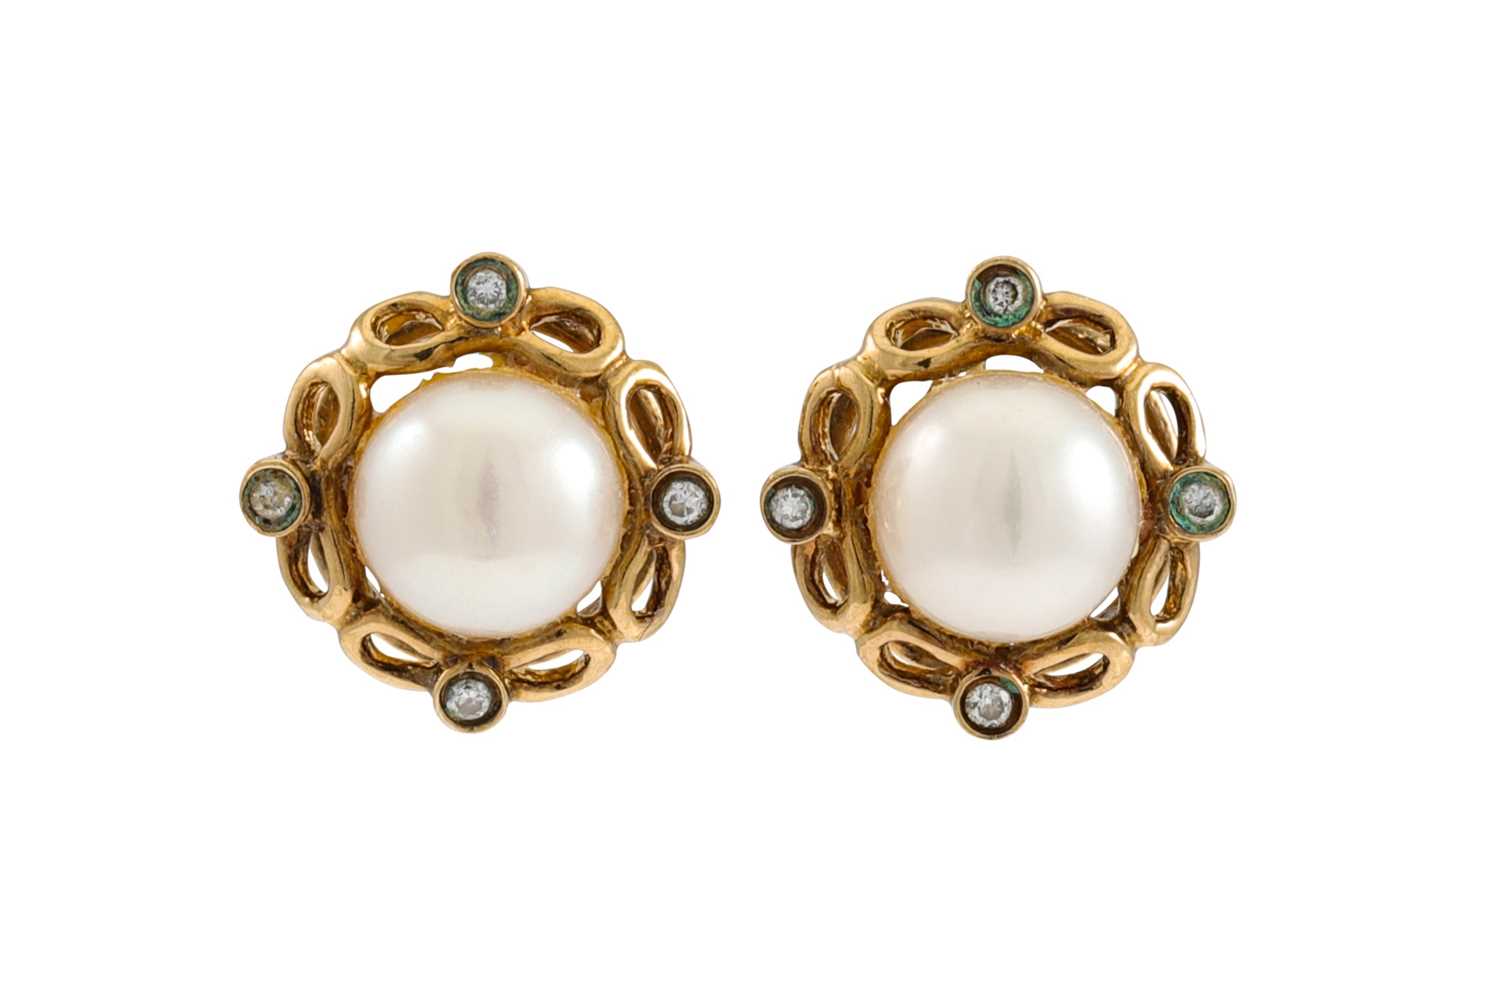 Lot 153 - A PAIR OF PEARL EARRINGS, mounted in 18ct gold